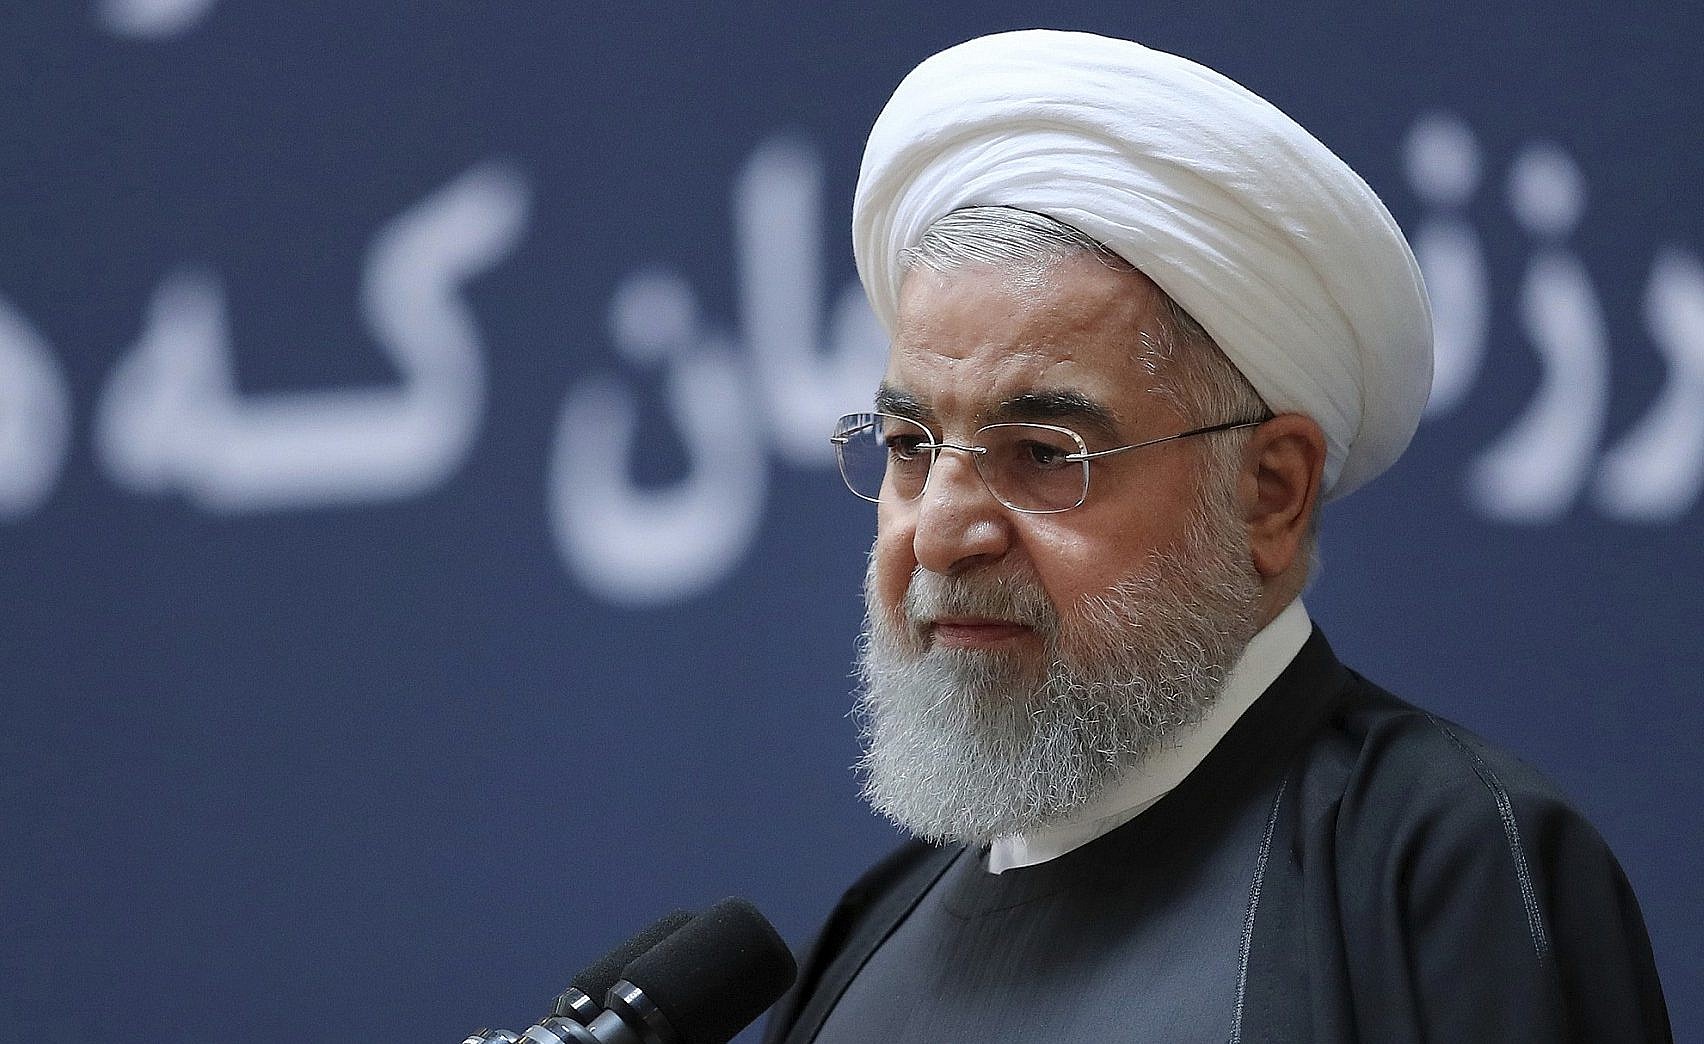 Iran’s beleaguered President Rouhani rules out resigning